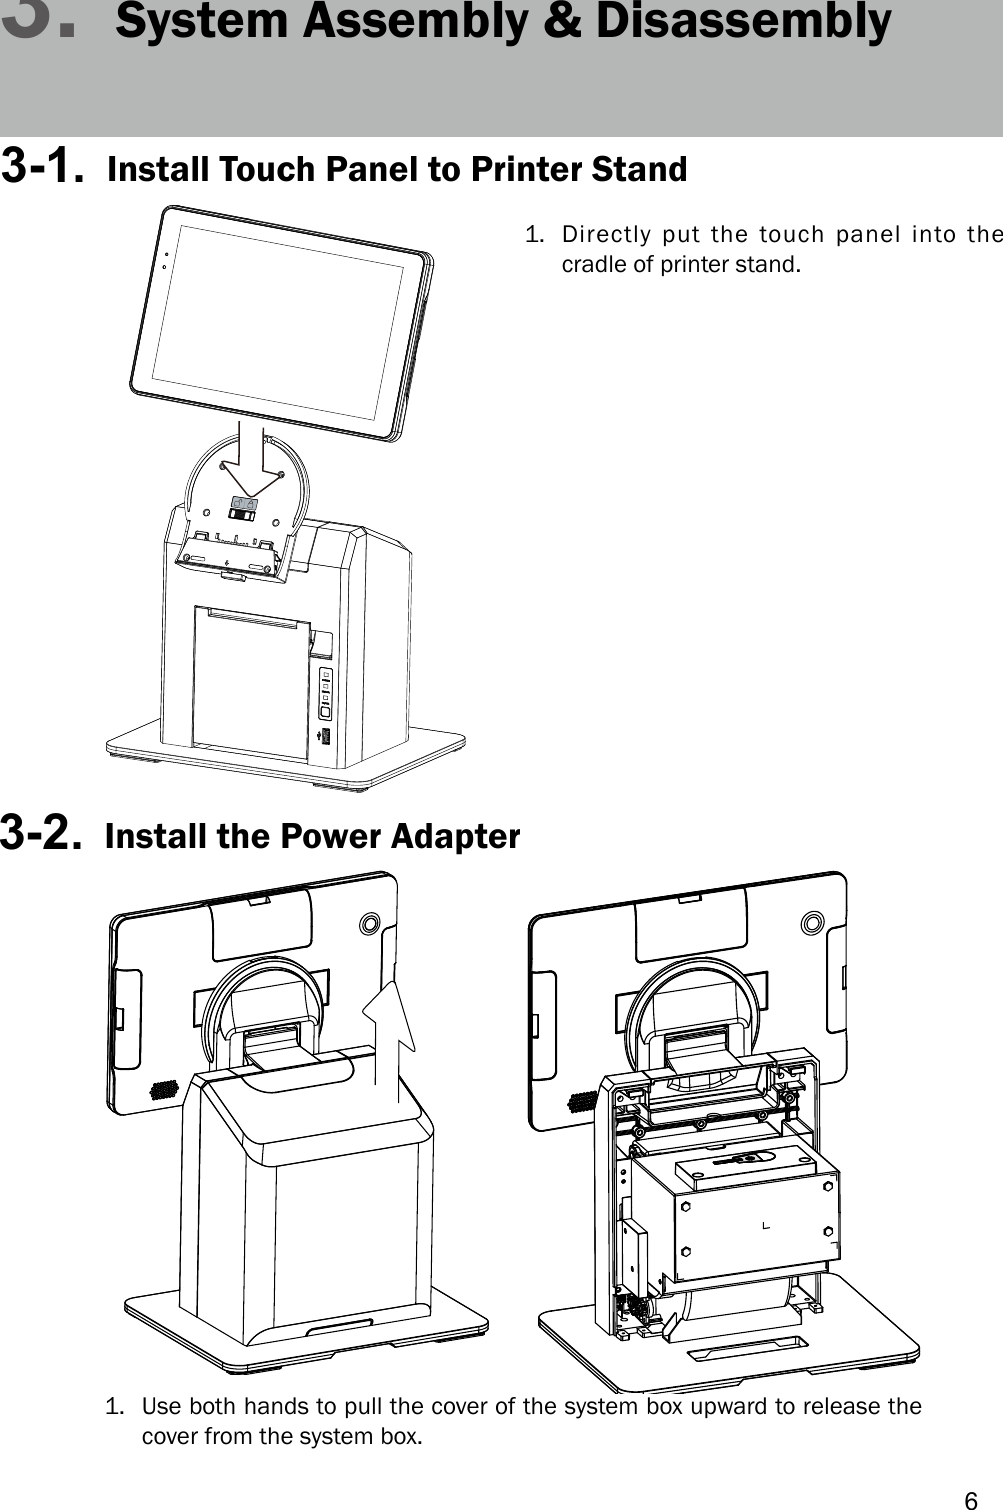 63. System Assembly &amp; Disassembly3-1.  Install Touch Panel to Printer Stand1. Directly put the touch panel into thecradle of printer stand.3-2.  Install the Power Adapter1. Use both hands to pull the cover of the system box upward to release thecover from the system box.